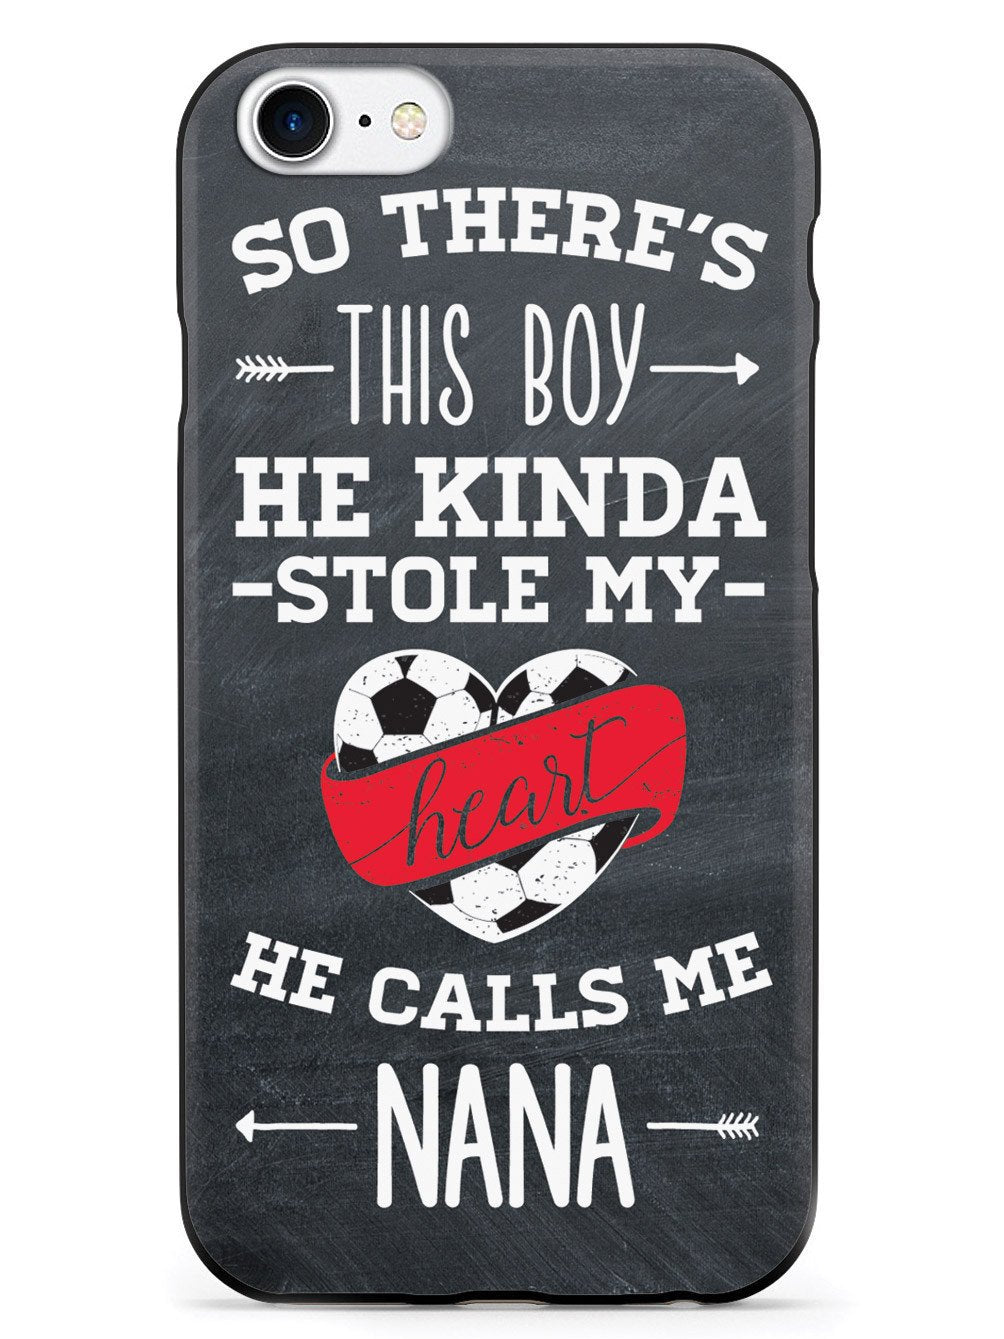 So there's this Boy - Soccer Player - Nana Case